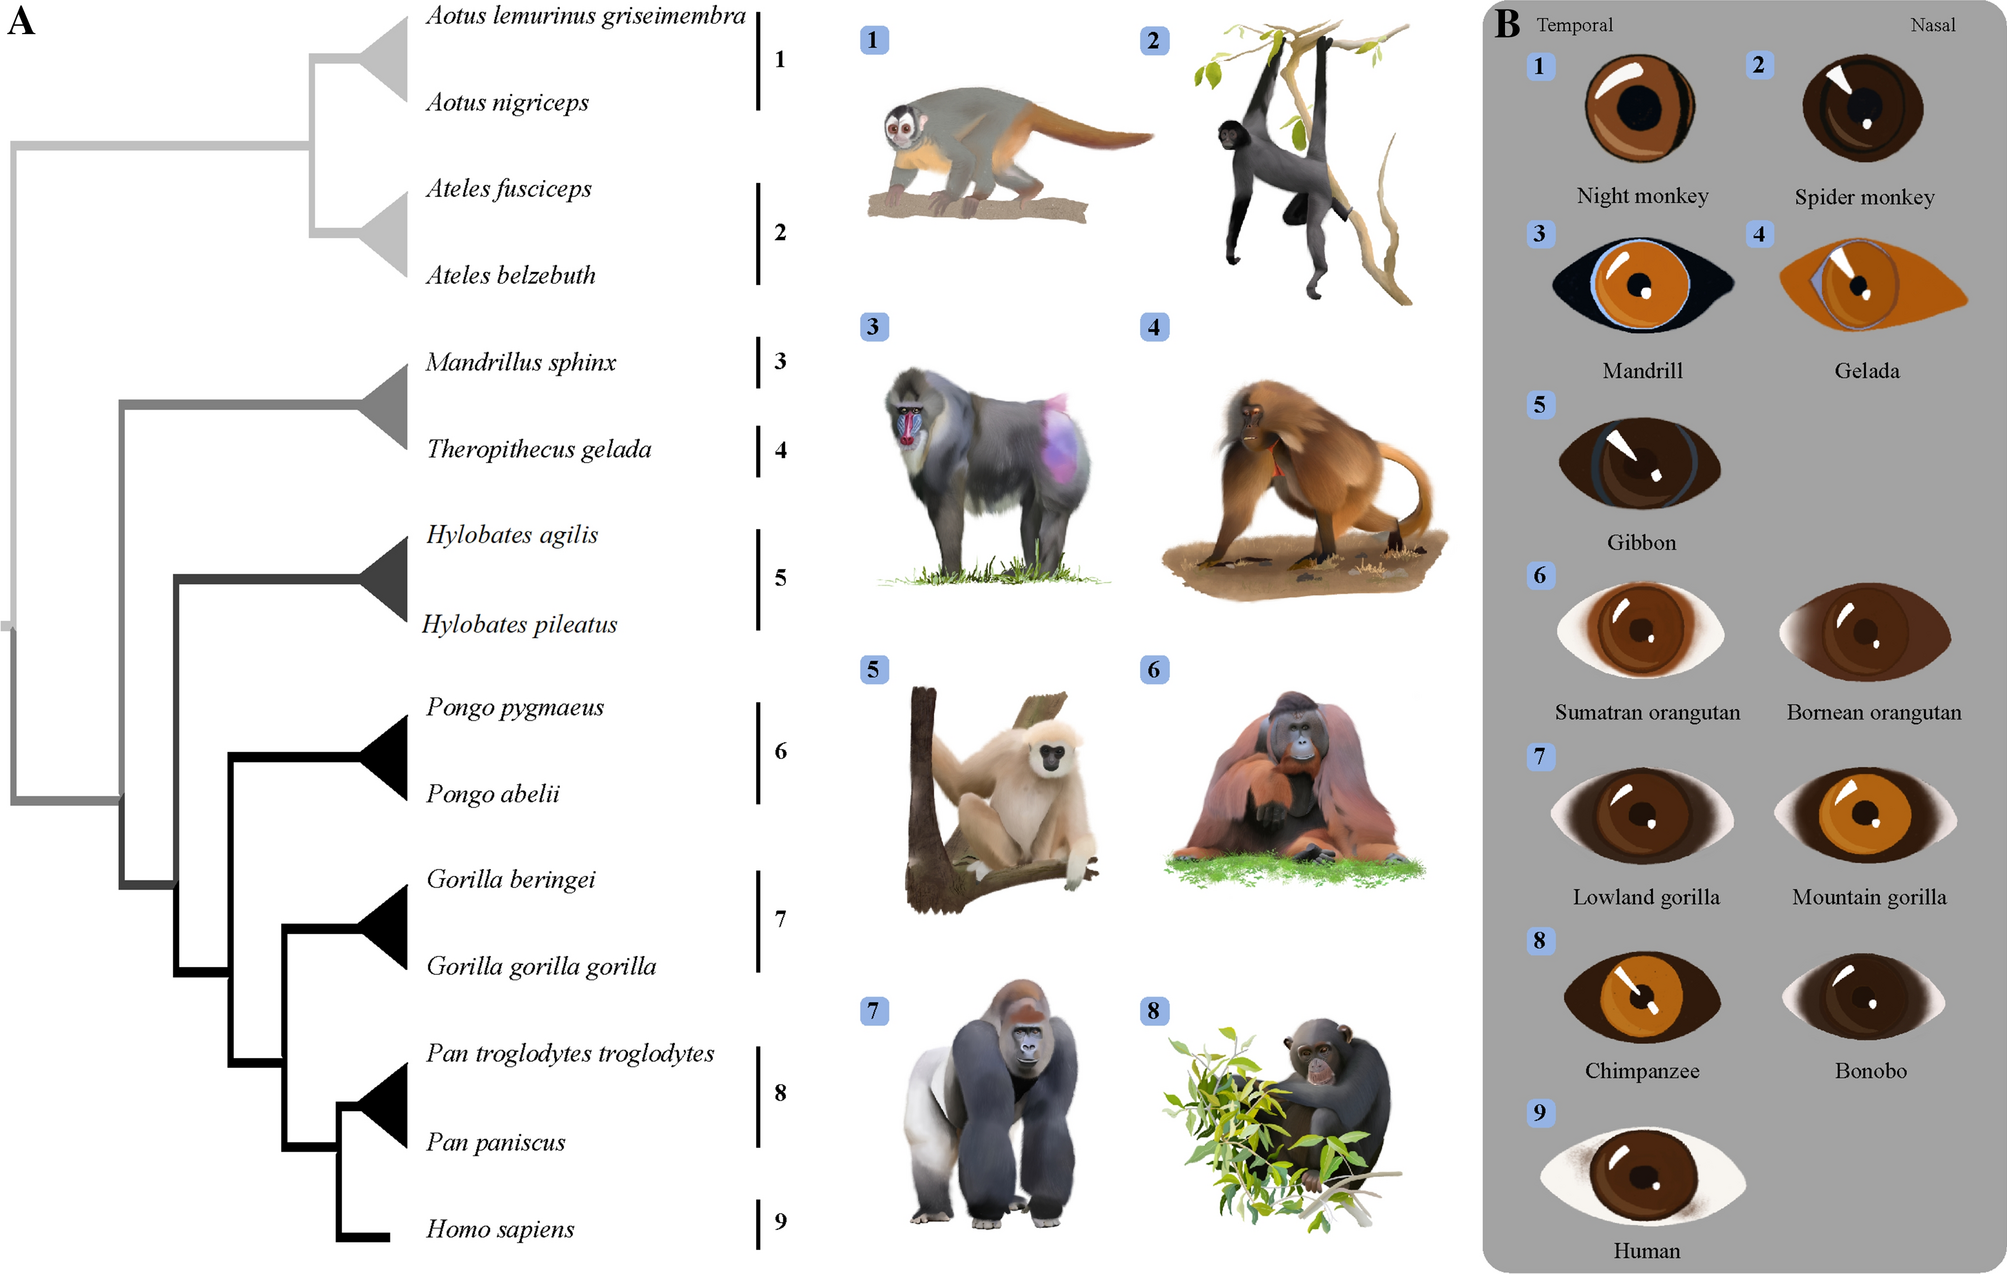 Ecological factors are likely drivers of eye shape and colour pattern variations across anthropoid primates Scientific Reports